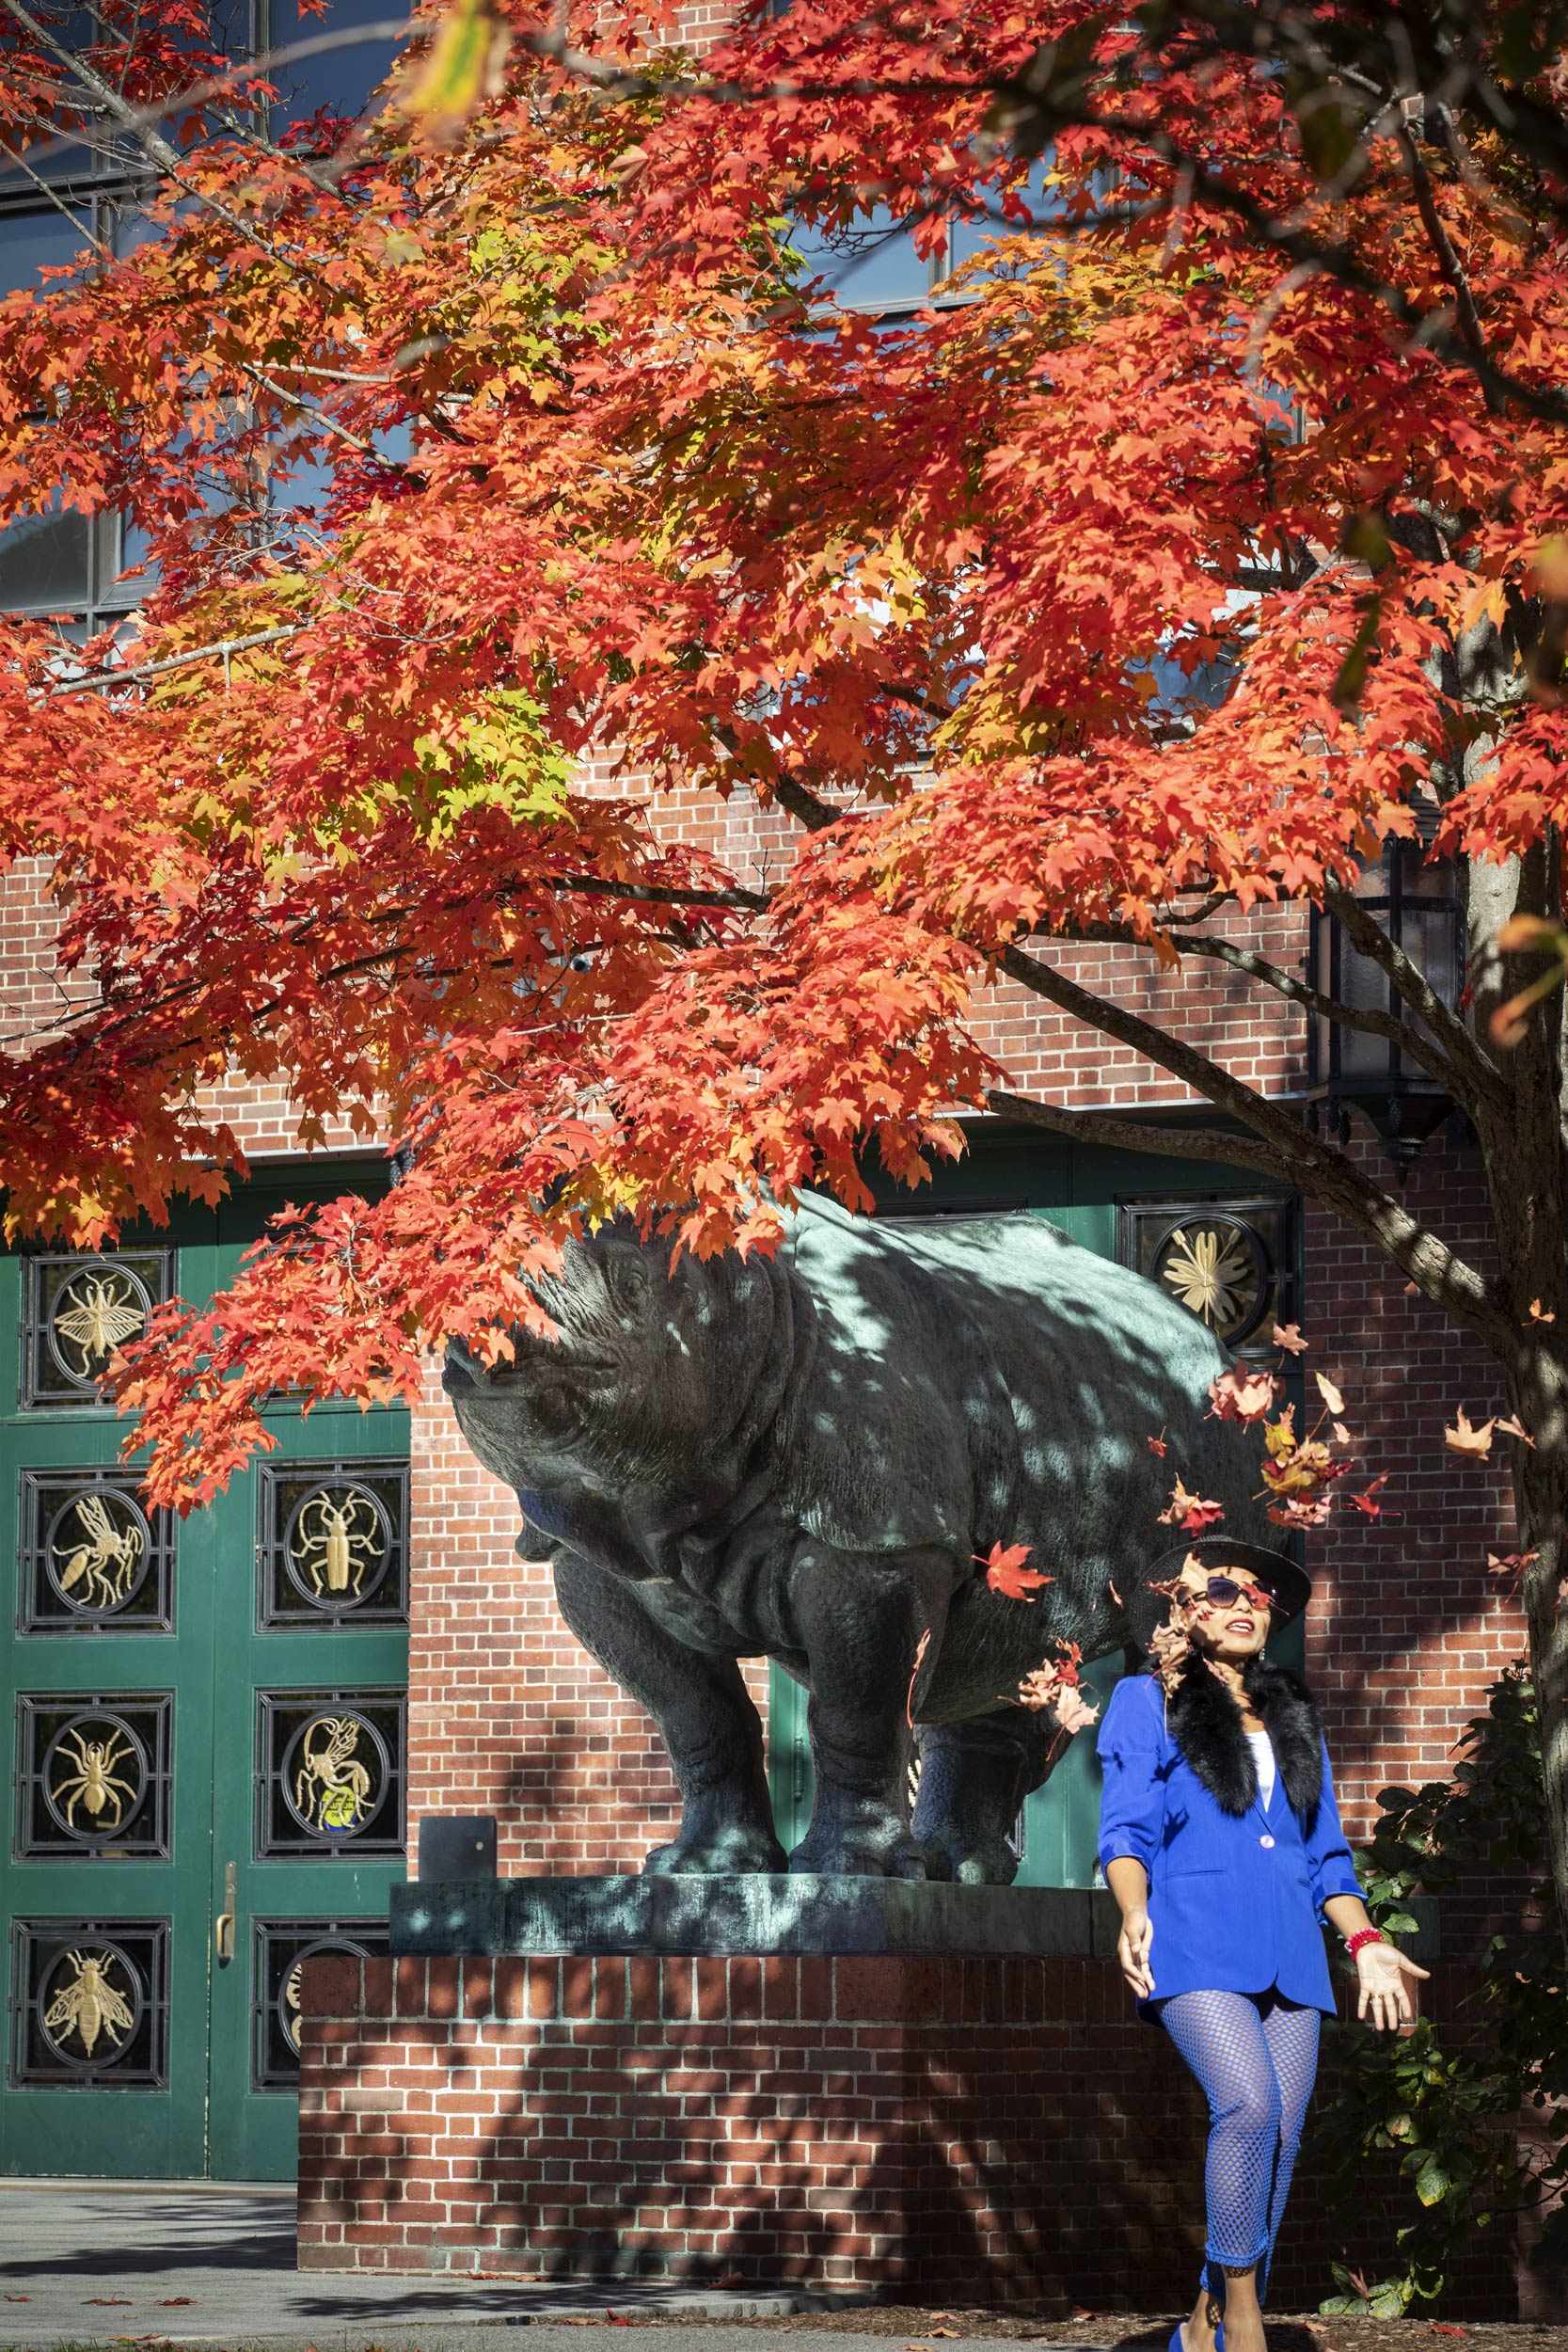 A woman throws autumn leaves into the air alongside one of two life-sized bronze sculptures that flanks the entrance to the Department of Molecular and Cellular Biology.